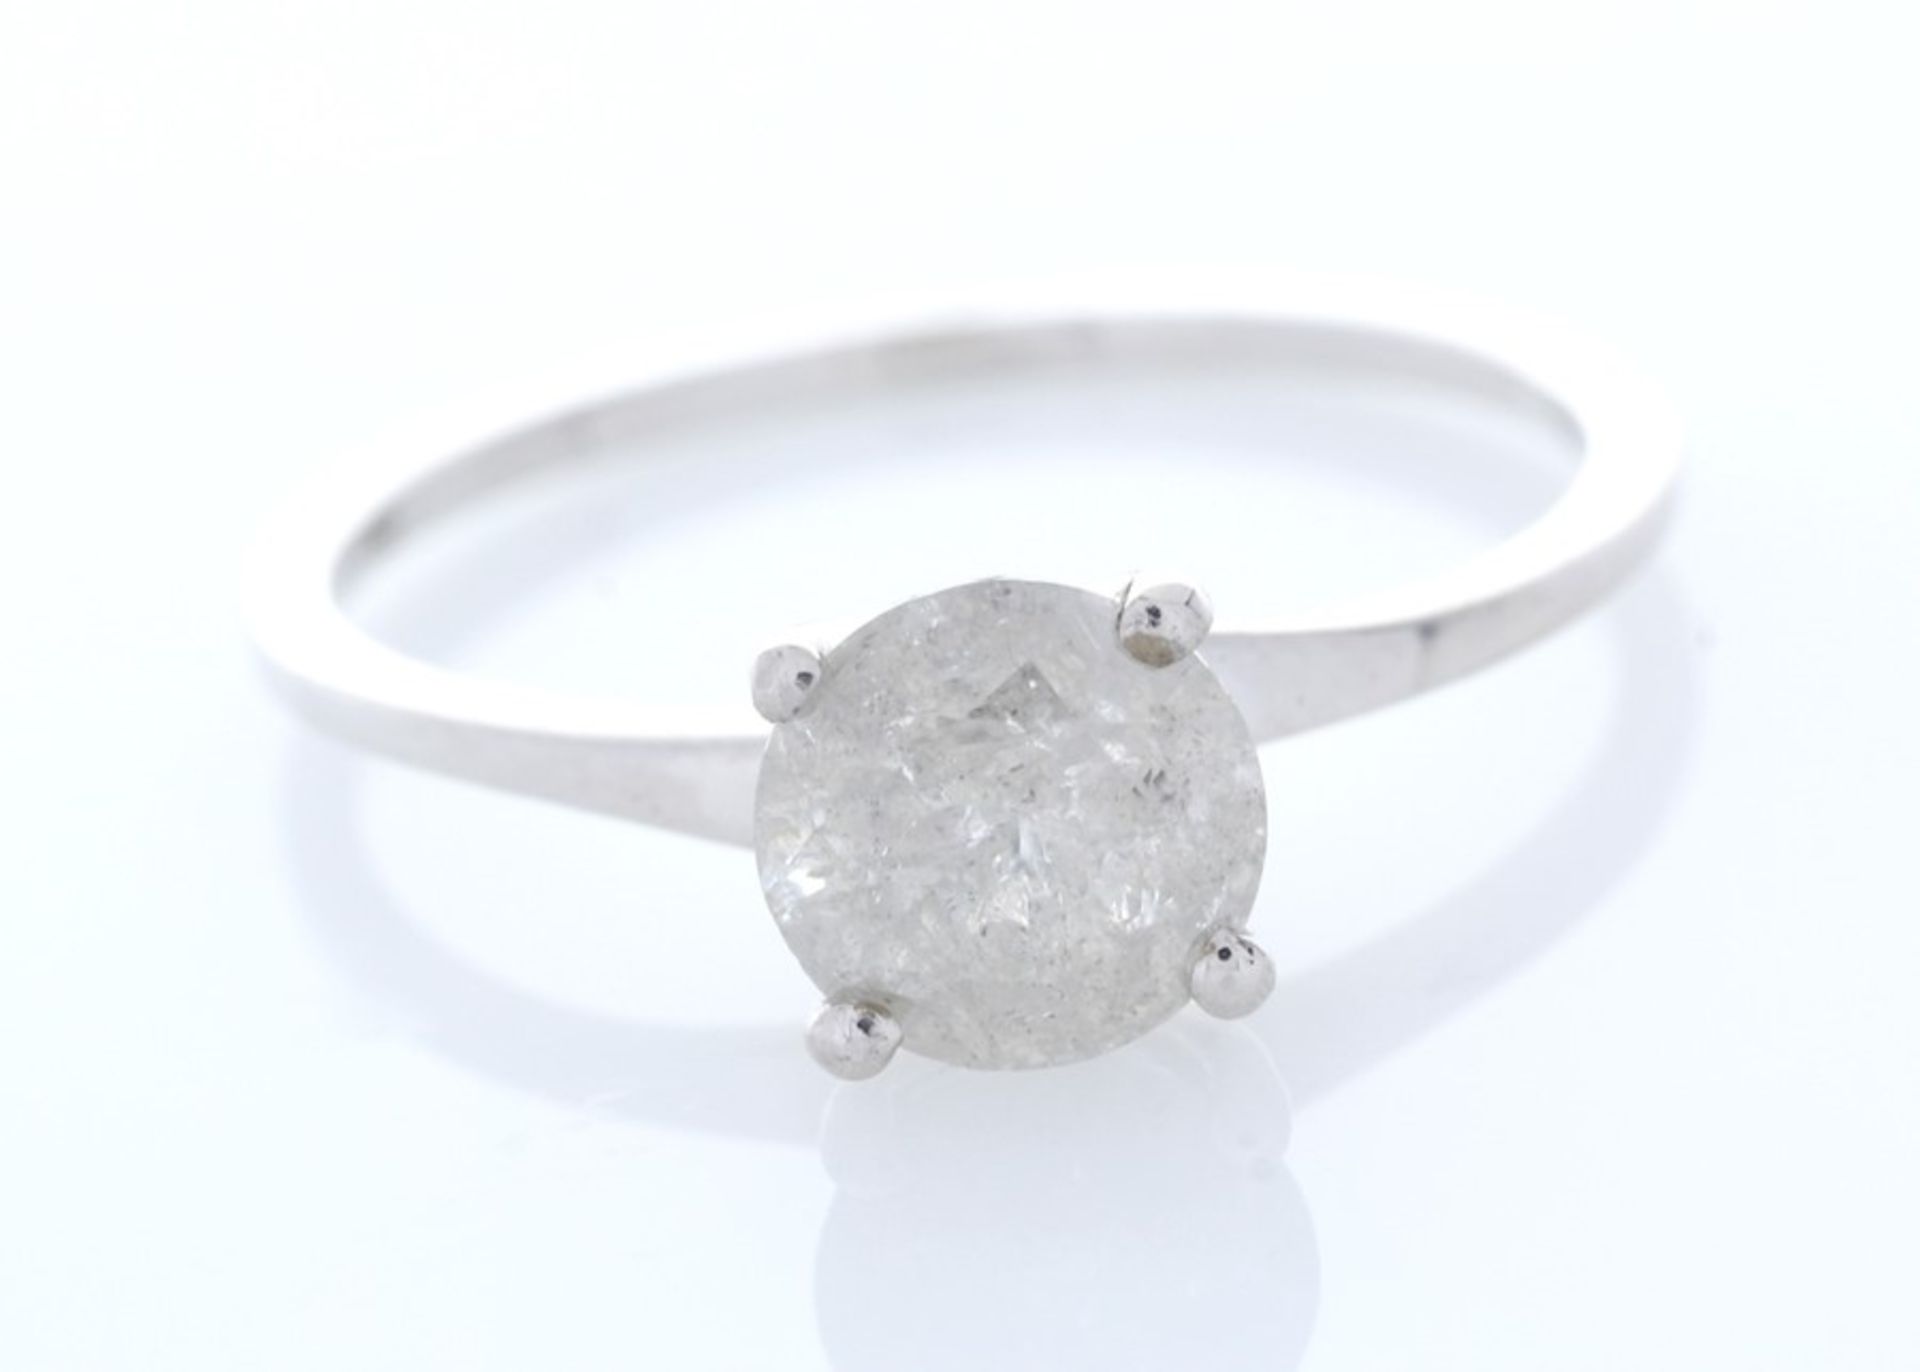 18ct White Gold Single Stone Wire Set Diamond Ring 1.05 Carats - Valued by GIE £12,250.00 - Image 3 of 4